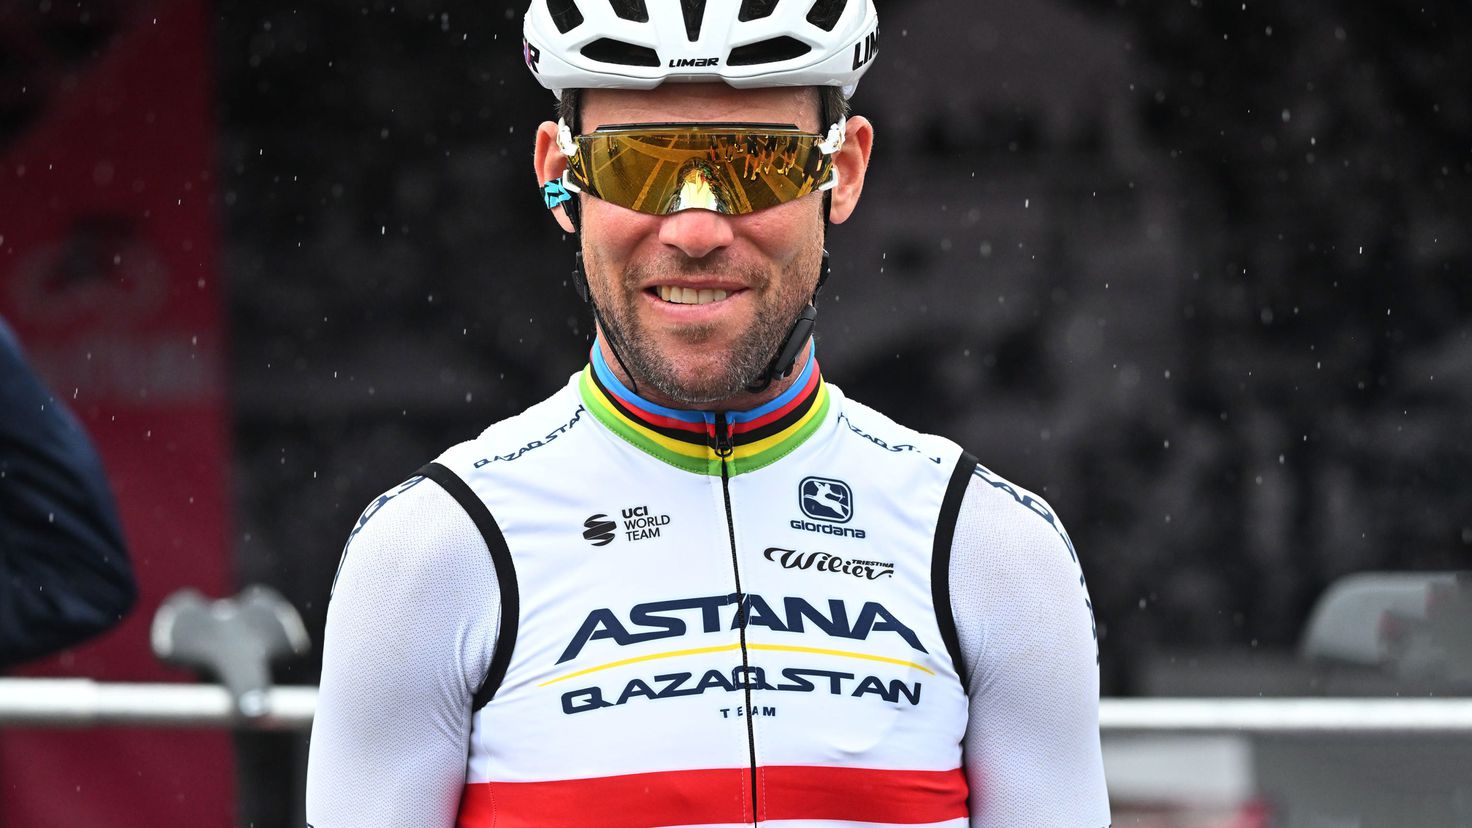 Mark Cavendish announces his retirement from professional cycling
